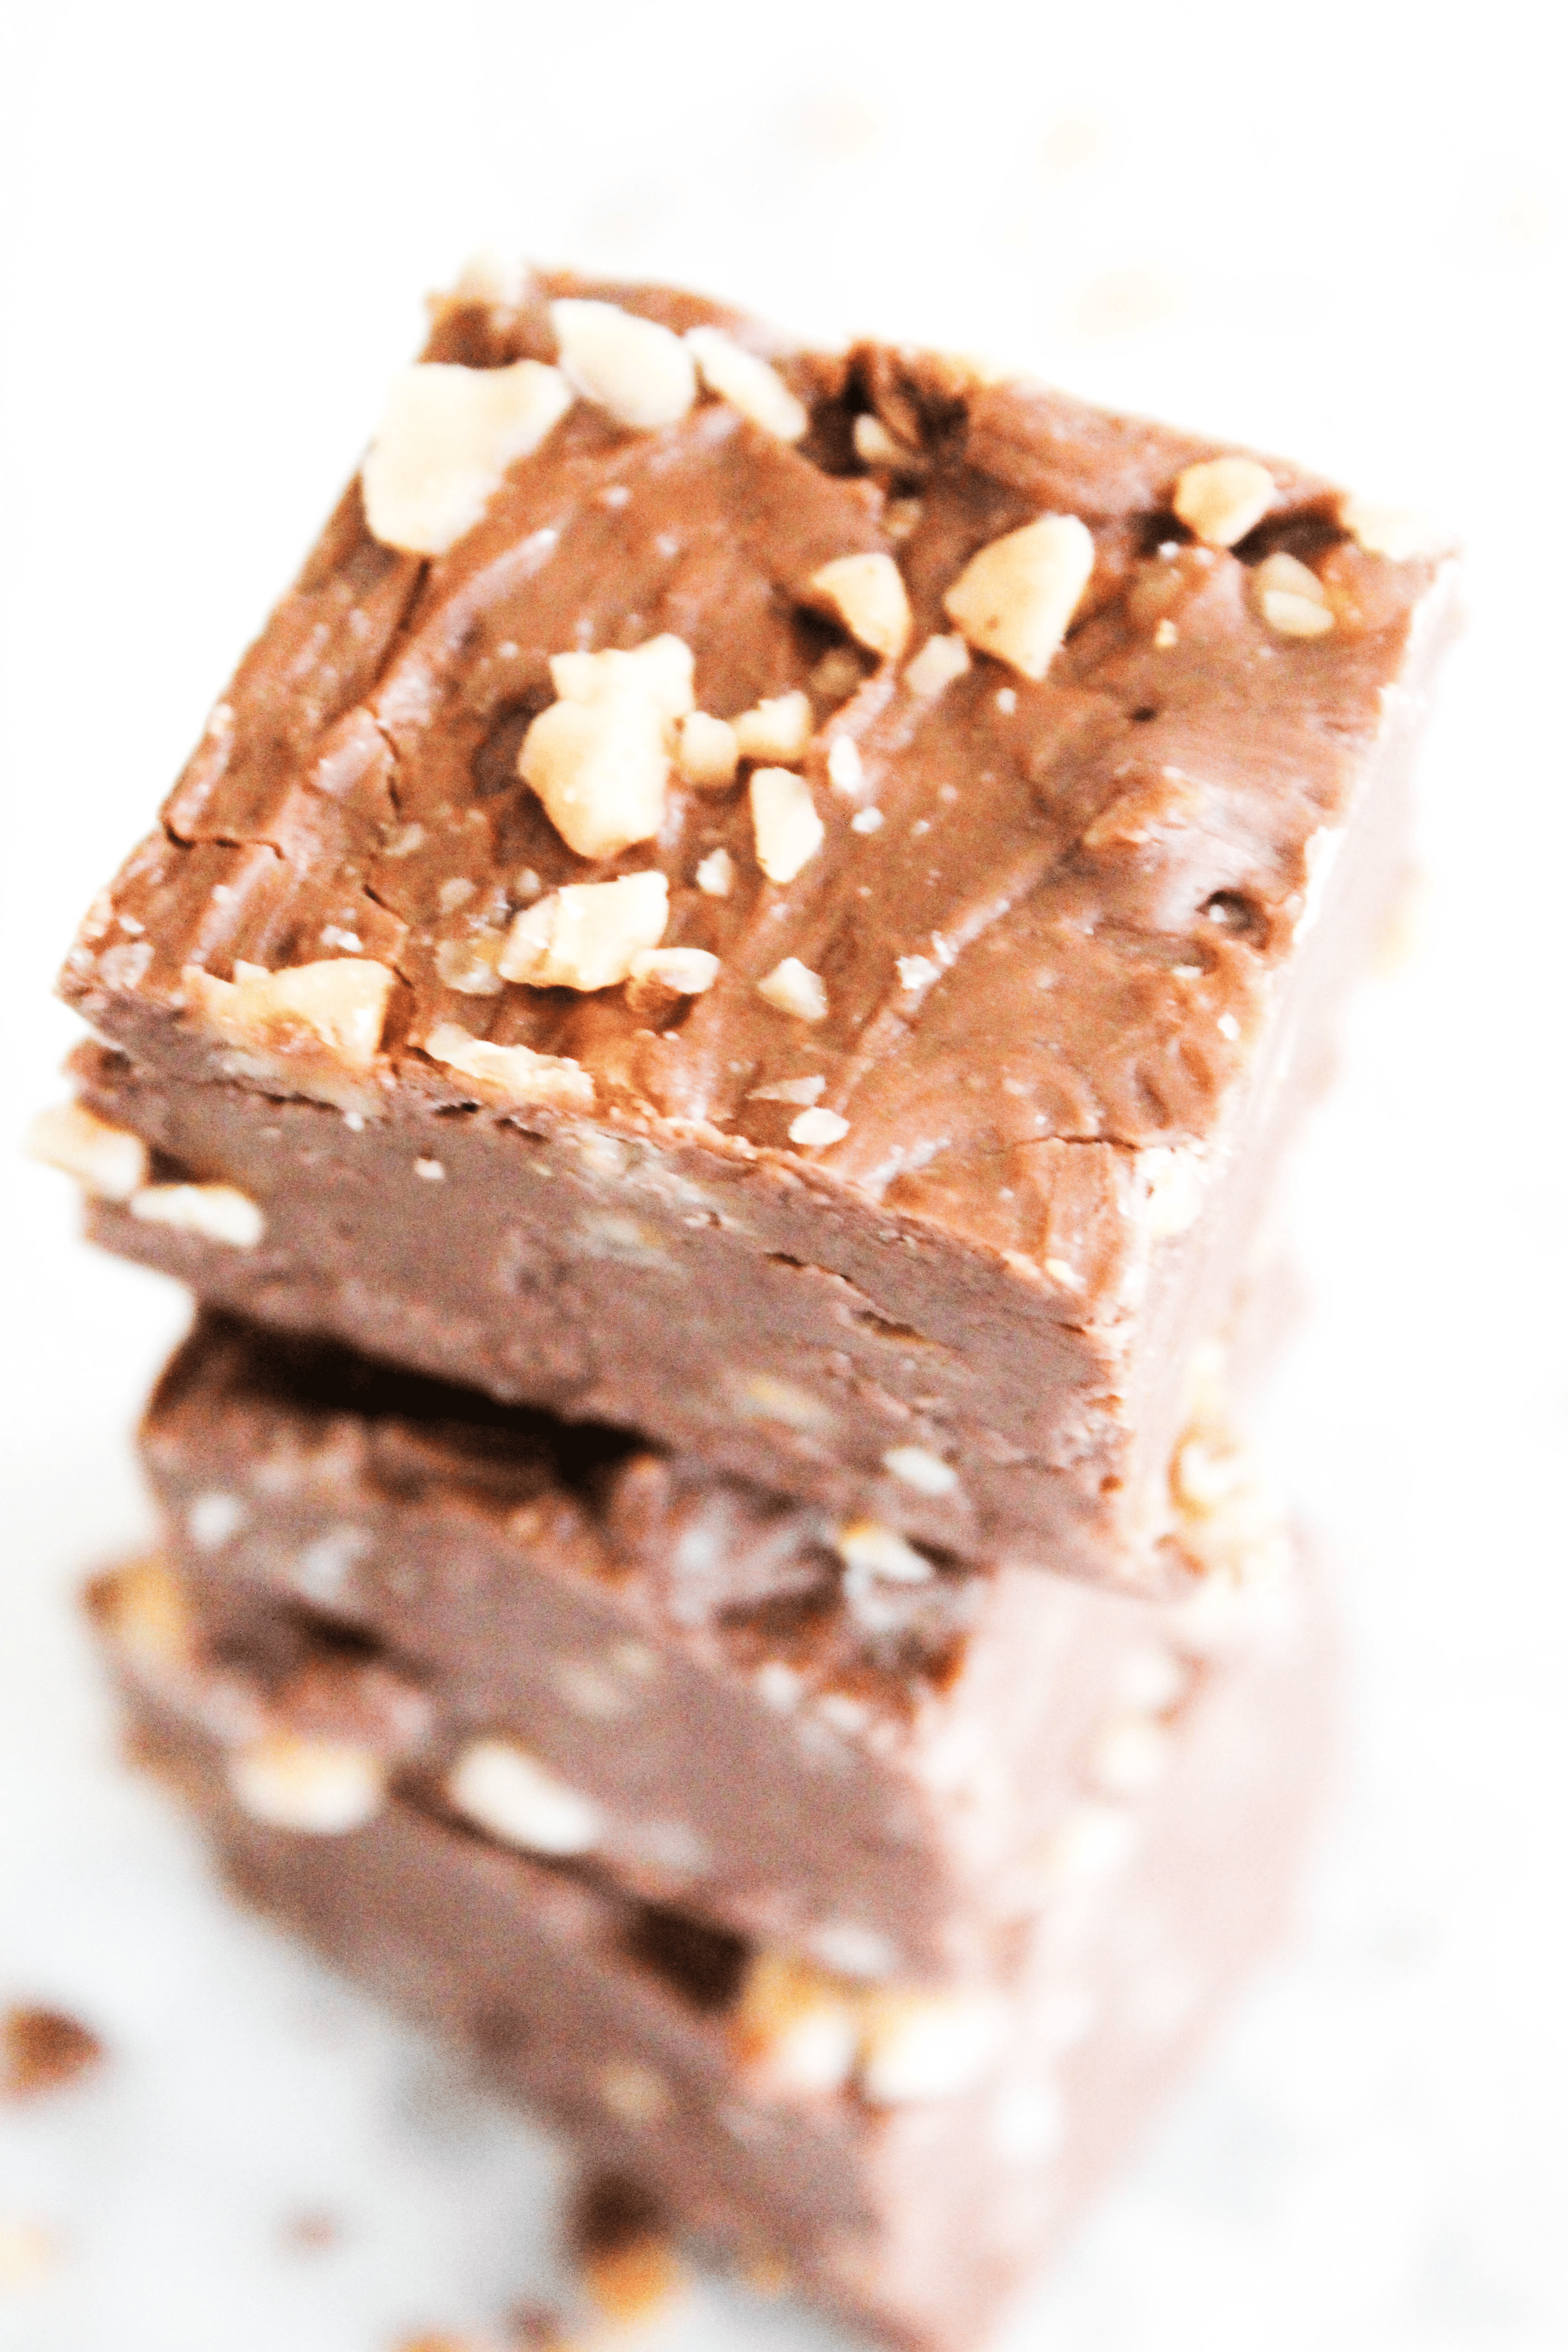 Toffee fudge with nuts